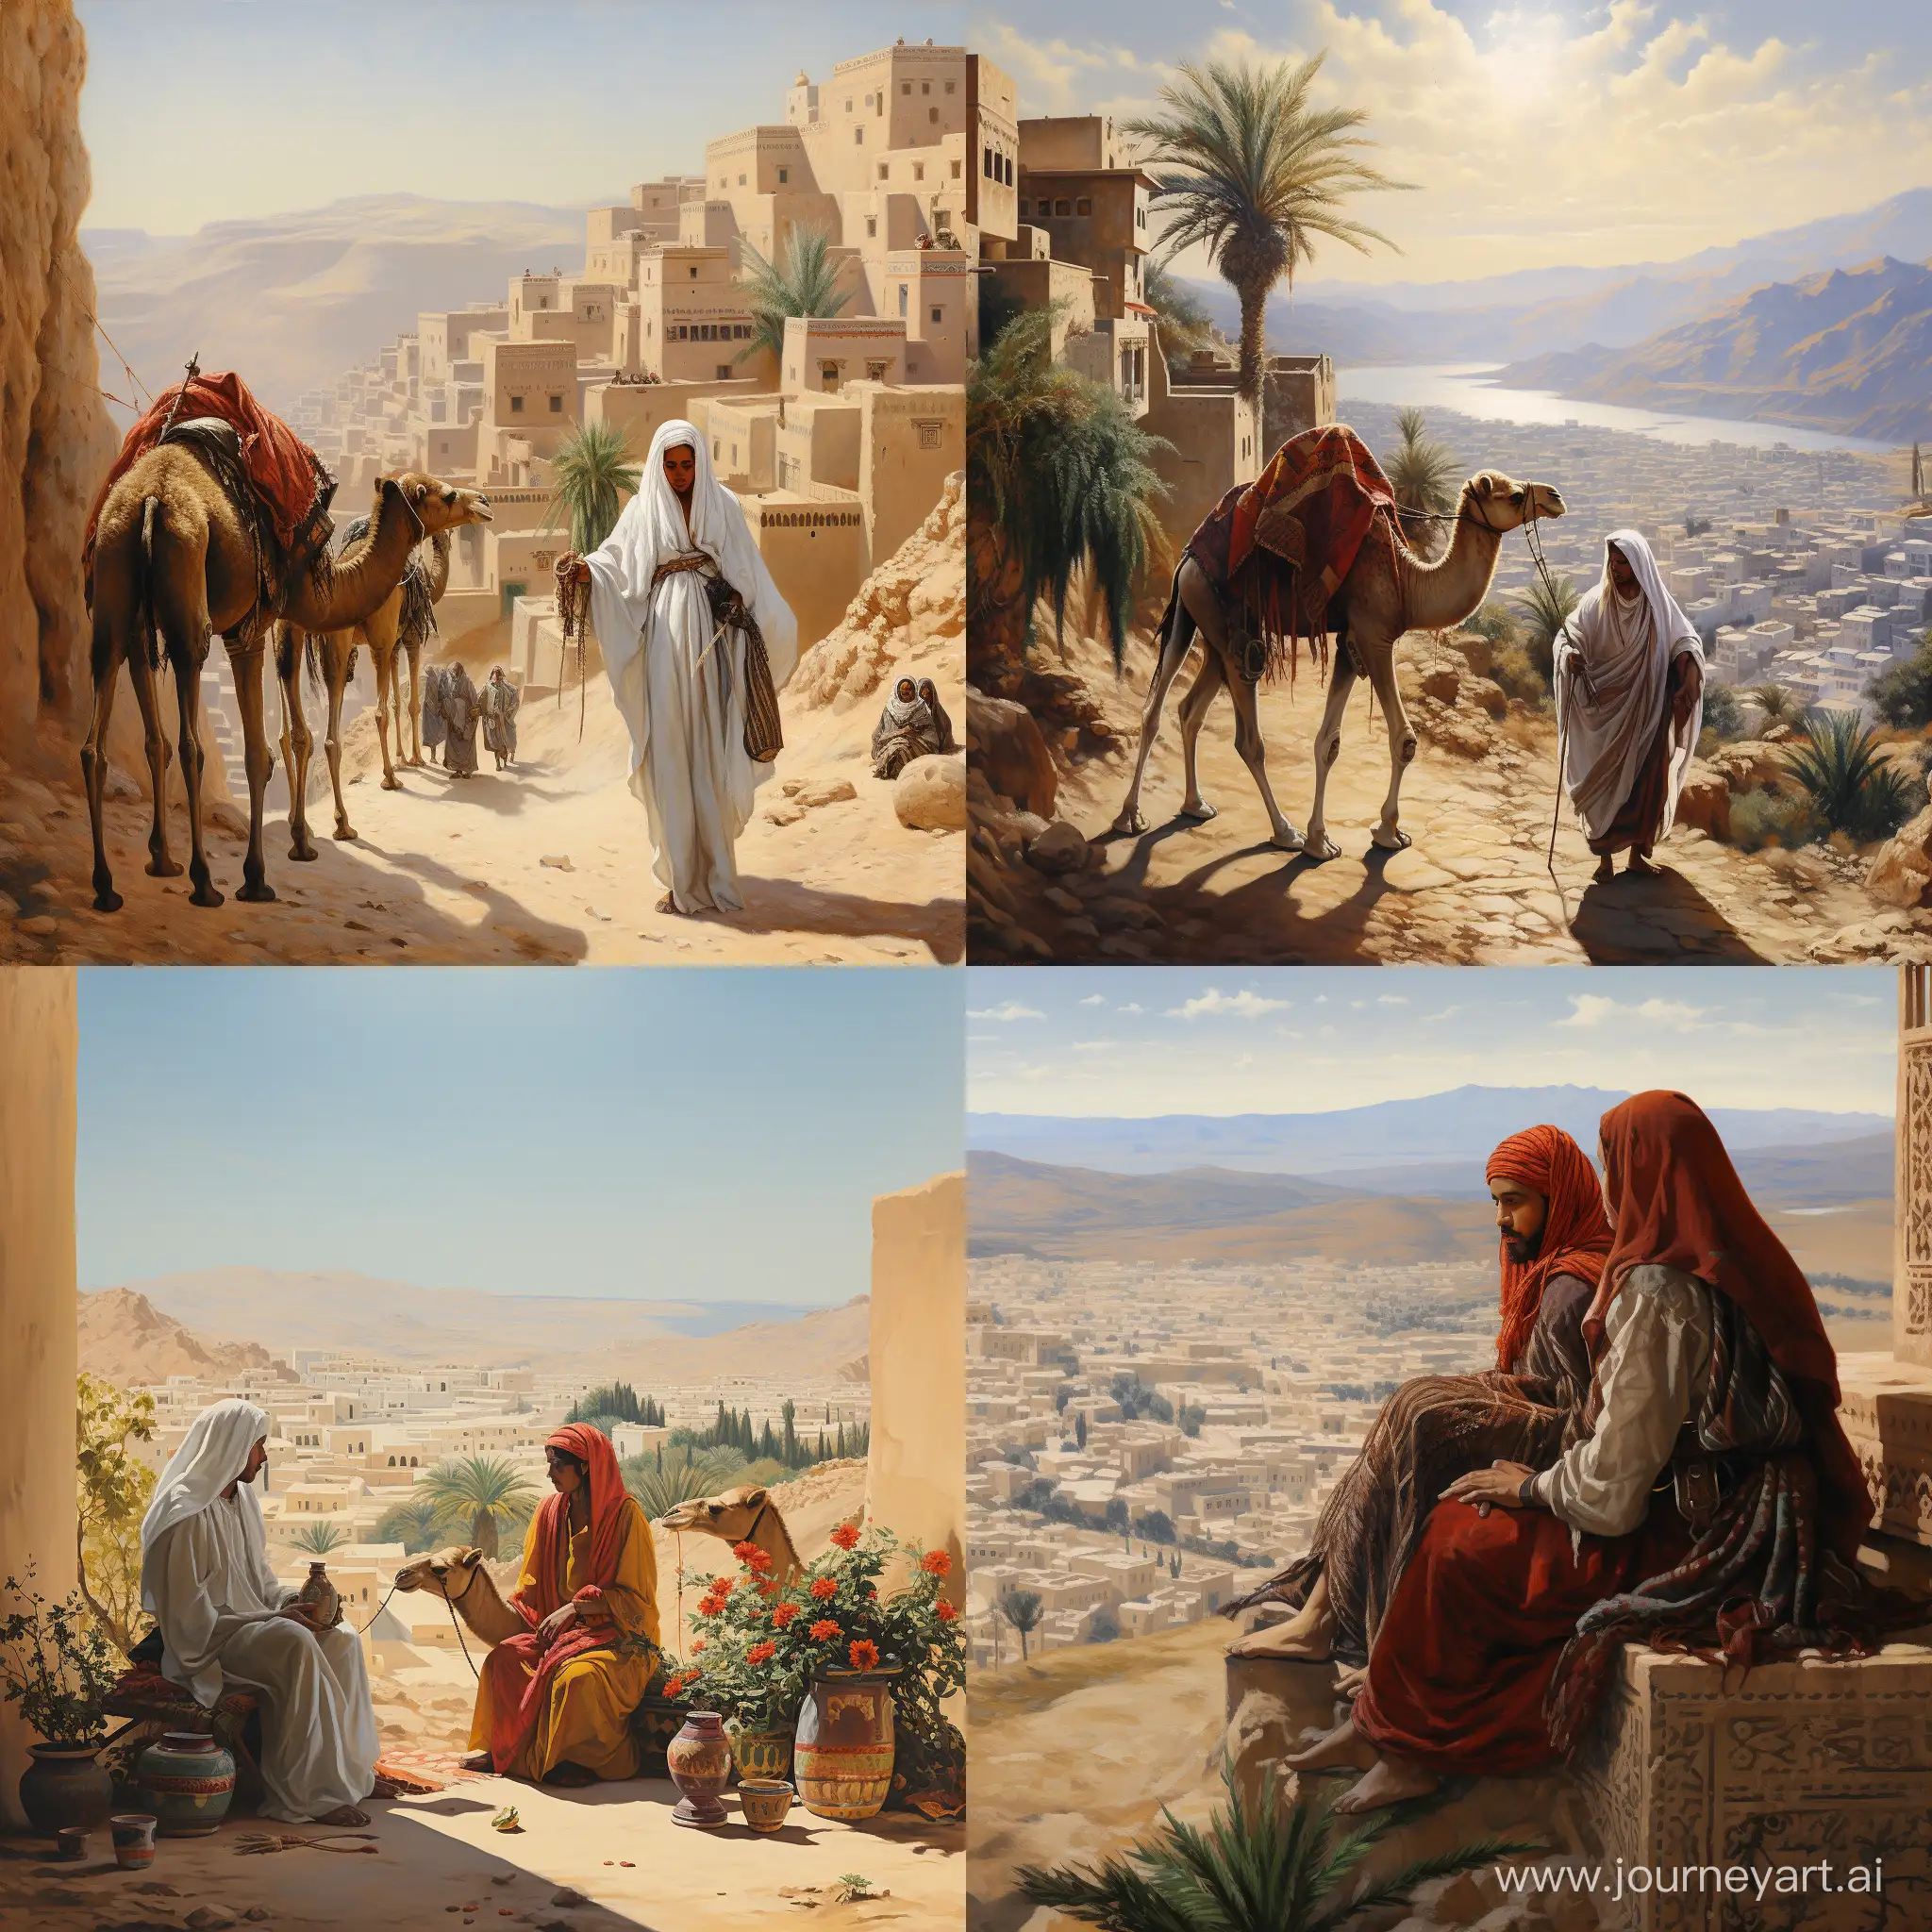 Arab-North-Africa-Cultural-Artwork-with-11-Aspect-Ratio